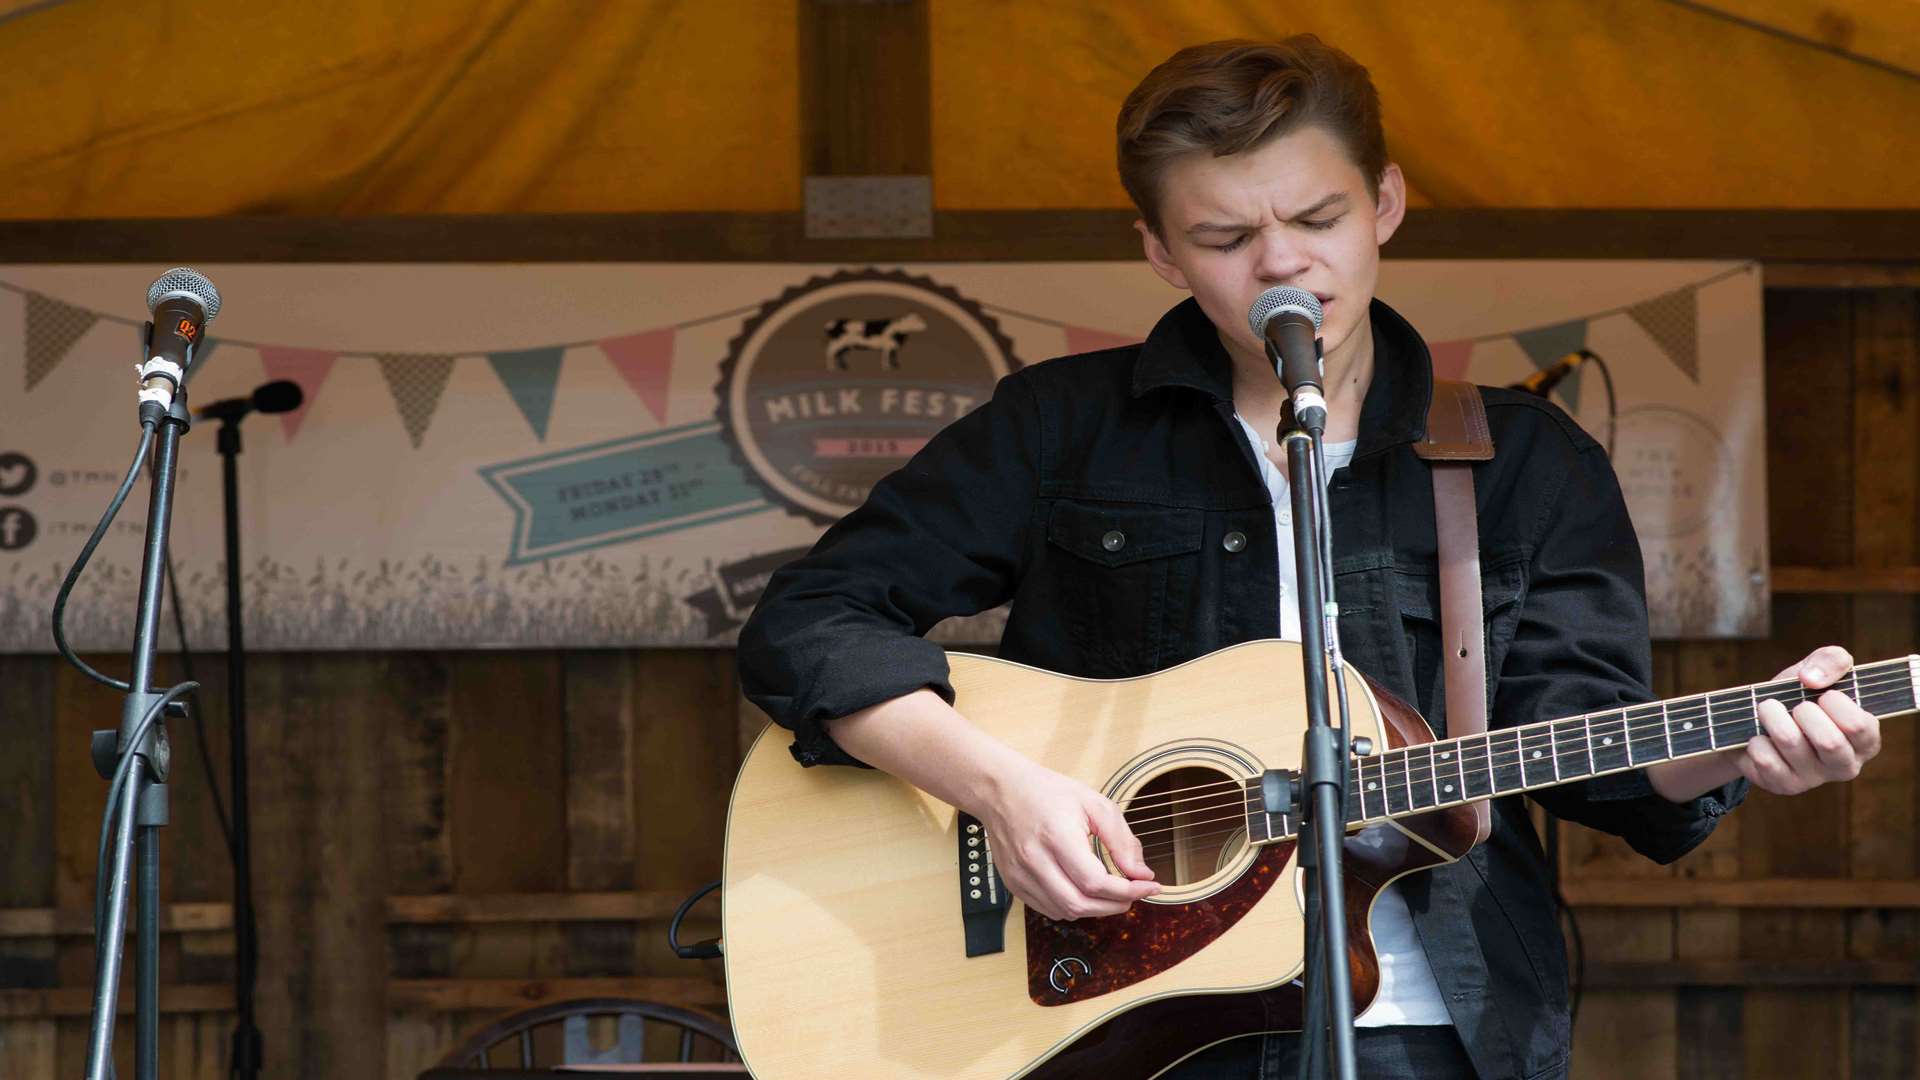 There'll be live music at the Milk House's full fat festival in Sissinghurst